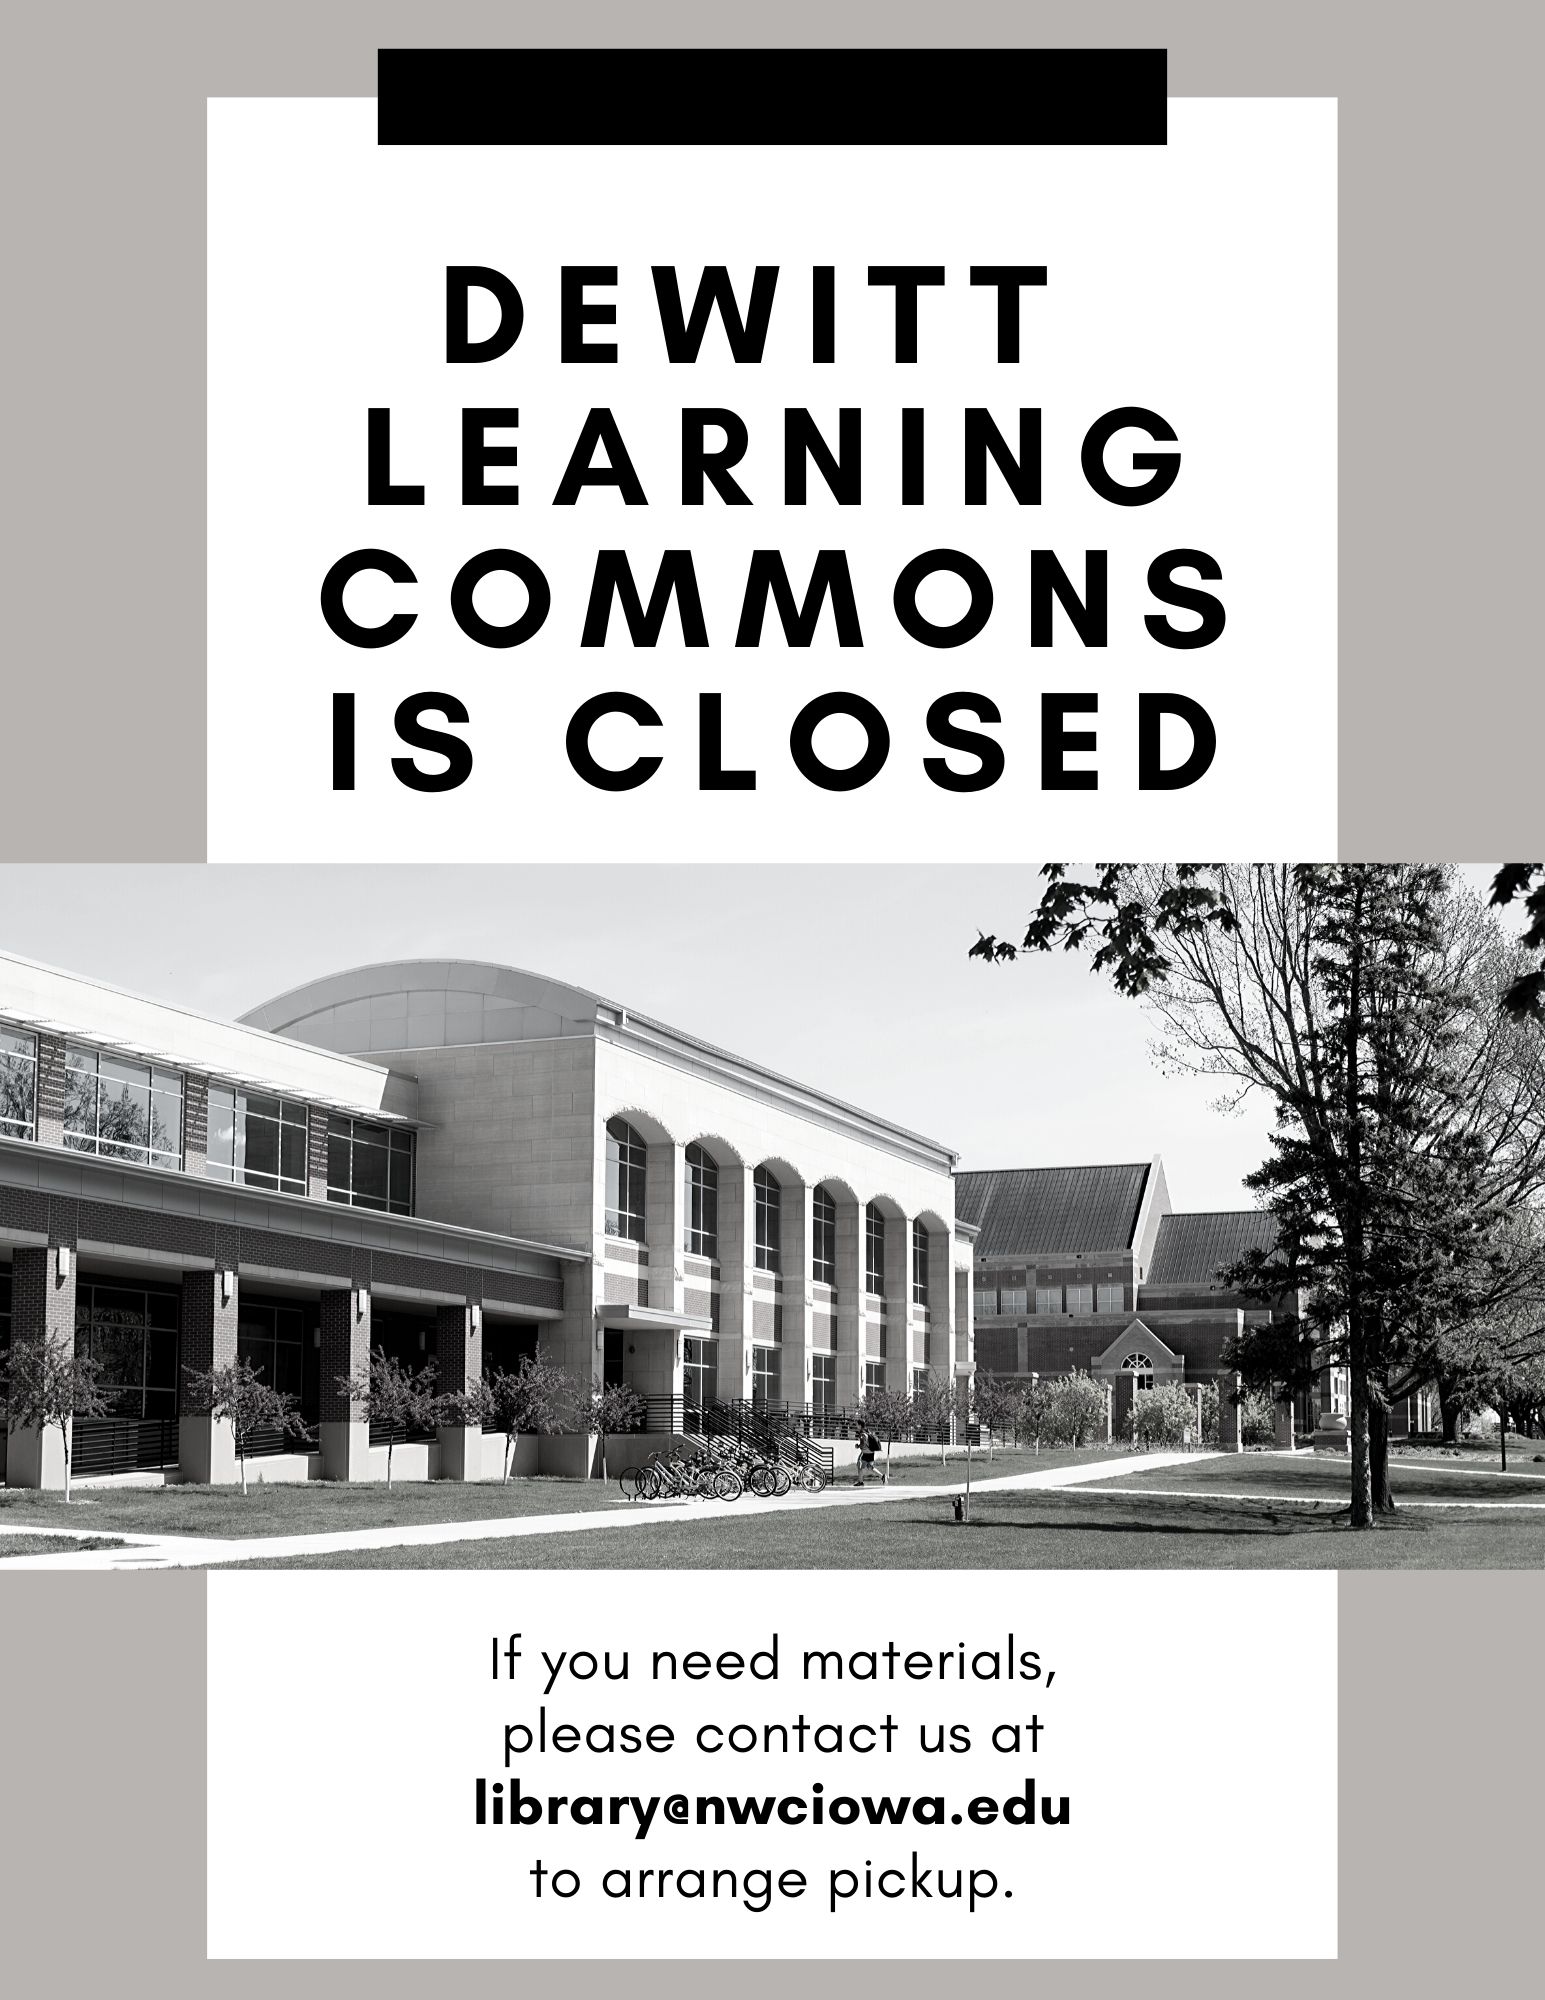 DeWitt Learning Commons is Closed